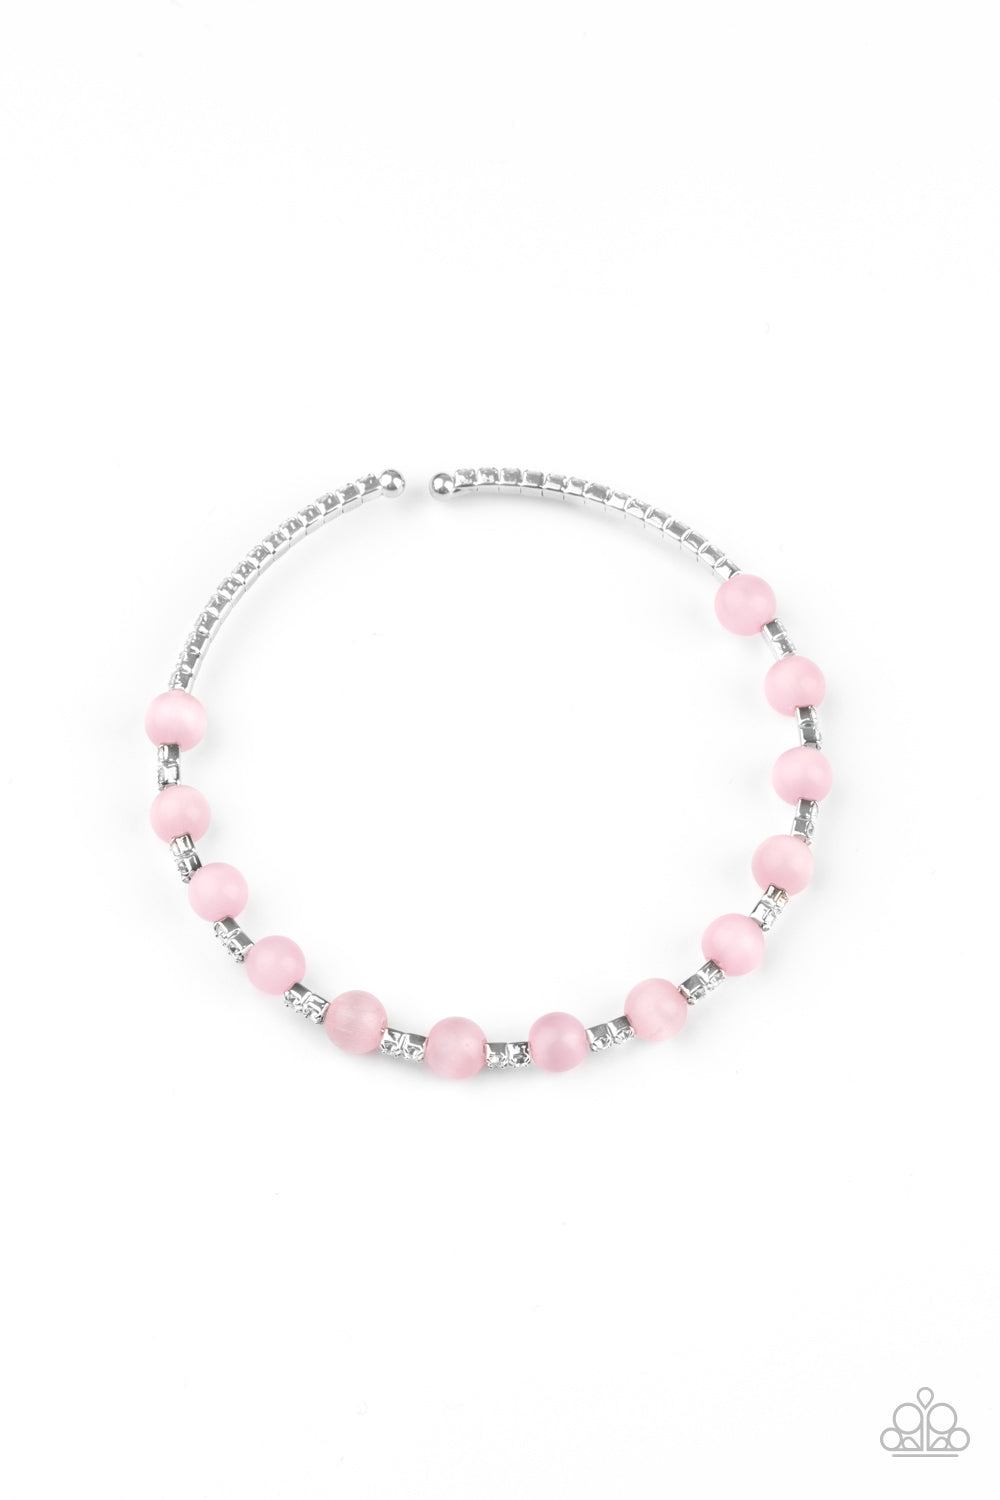 Tea Party Twinkle Pink Bracelet - Paparazzi Accessories  Glassy pink cat's eye stones are fitted in place along a dainty strand of glassy white rhinestones, creating a twinkly cuff around the wrist.  All Paparazzi Accessories are lead free and nickel free!  Sold as one individual bracelet.